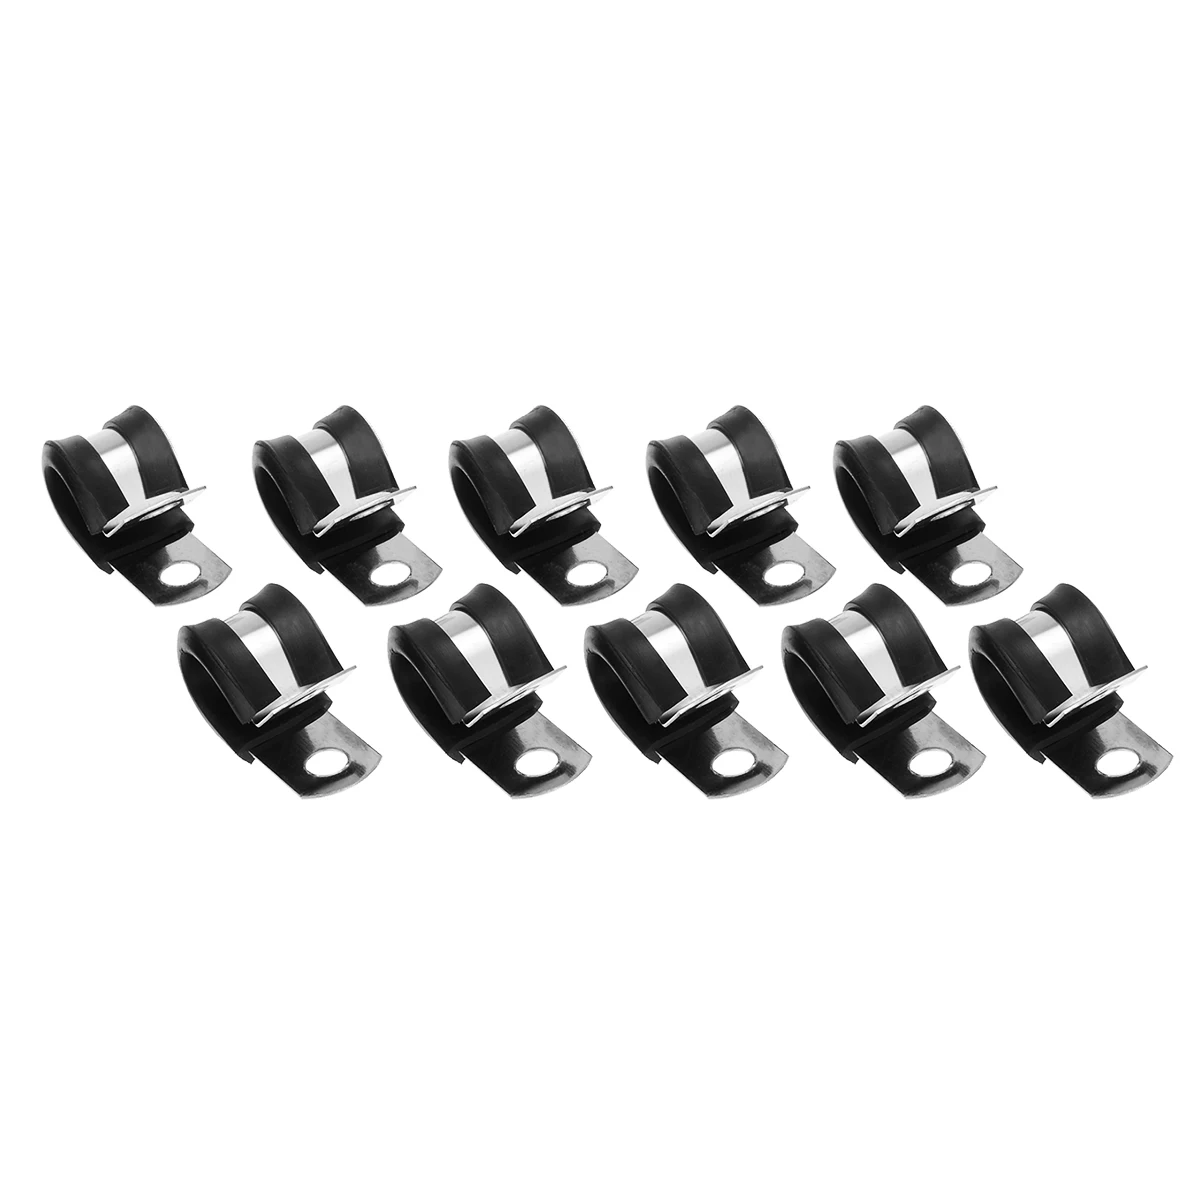 10Pcs 13mm P Clips Rubber Coated Stainless Steel Clamp Tube Pipe Cable Mounting Bracket Clips Fastener